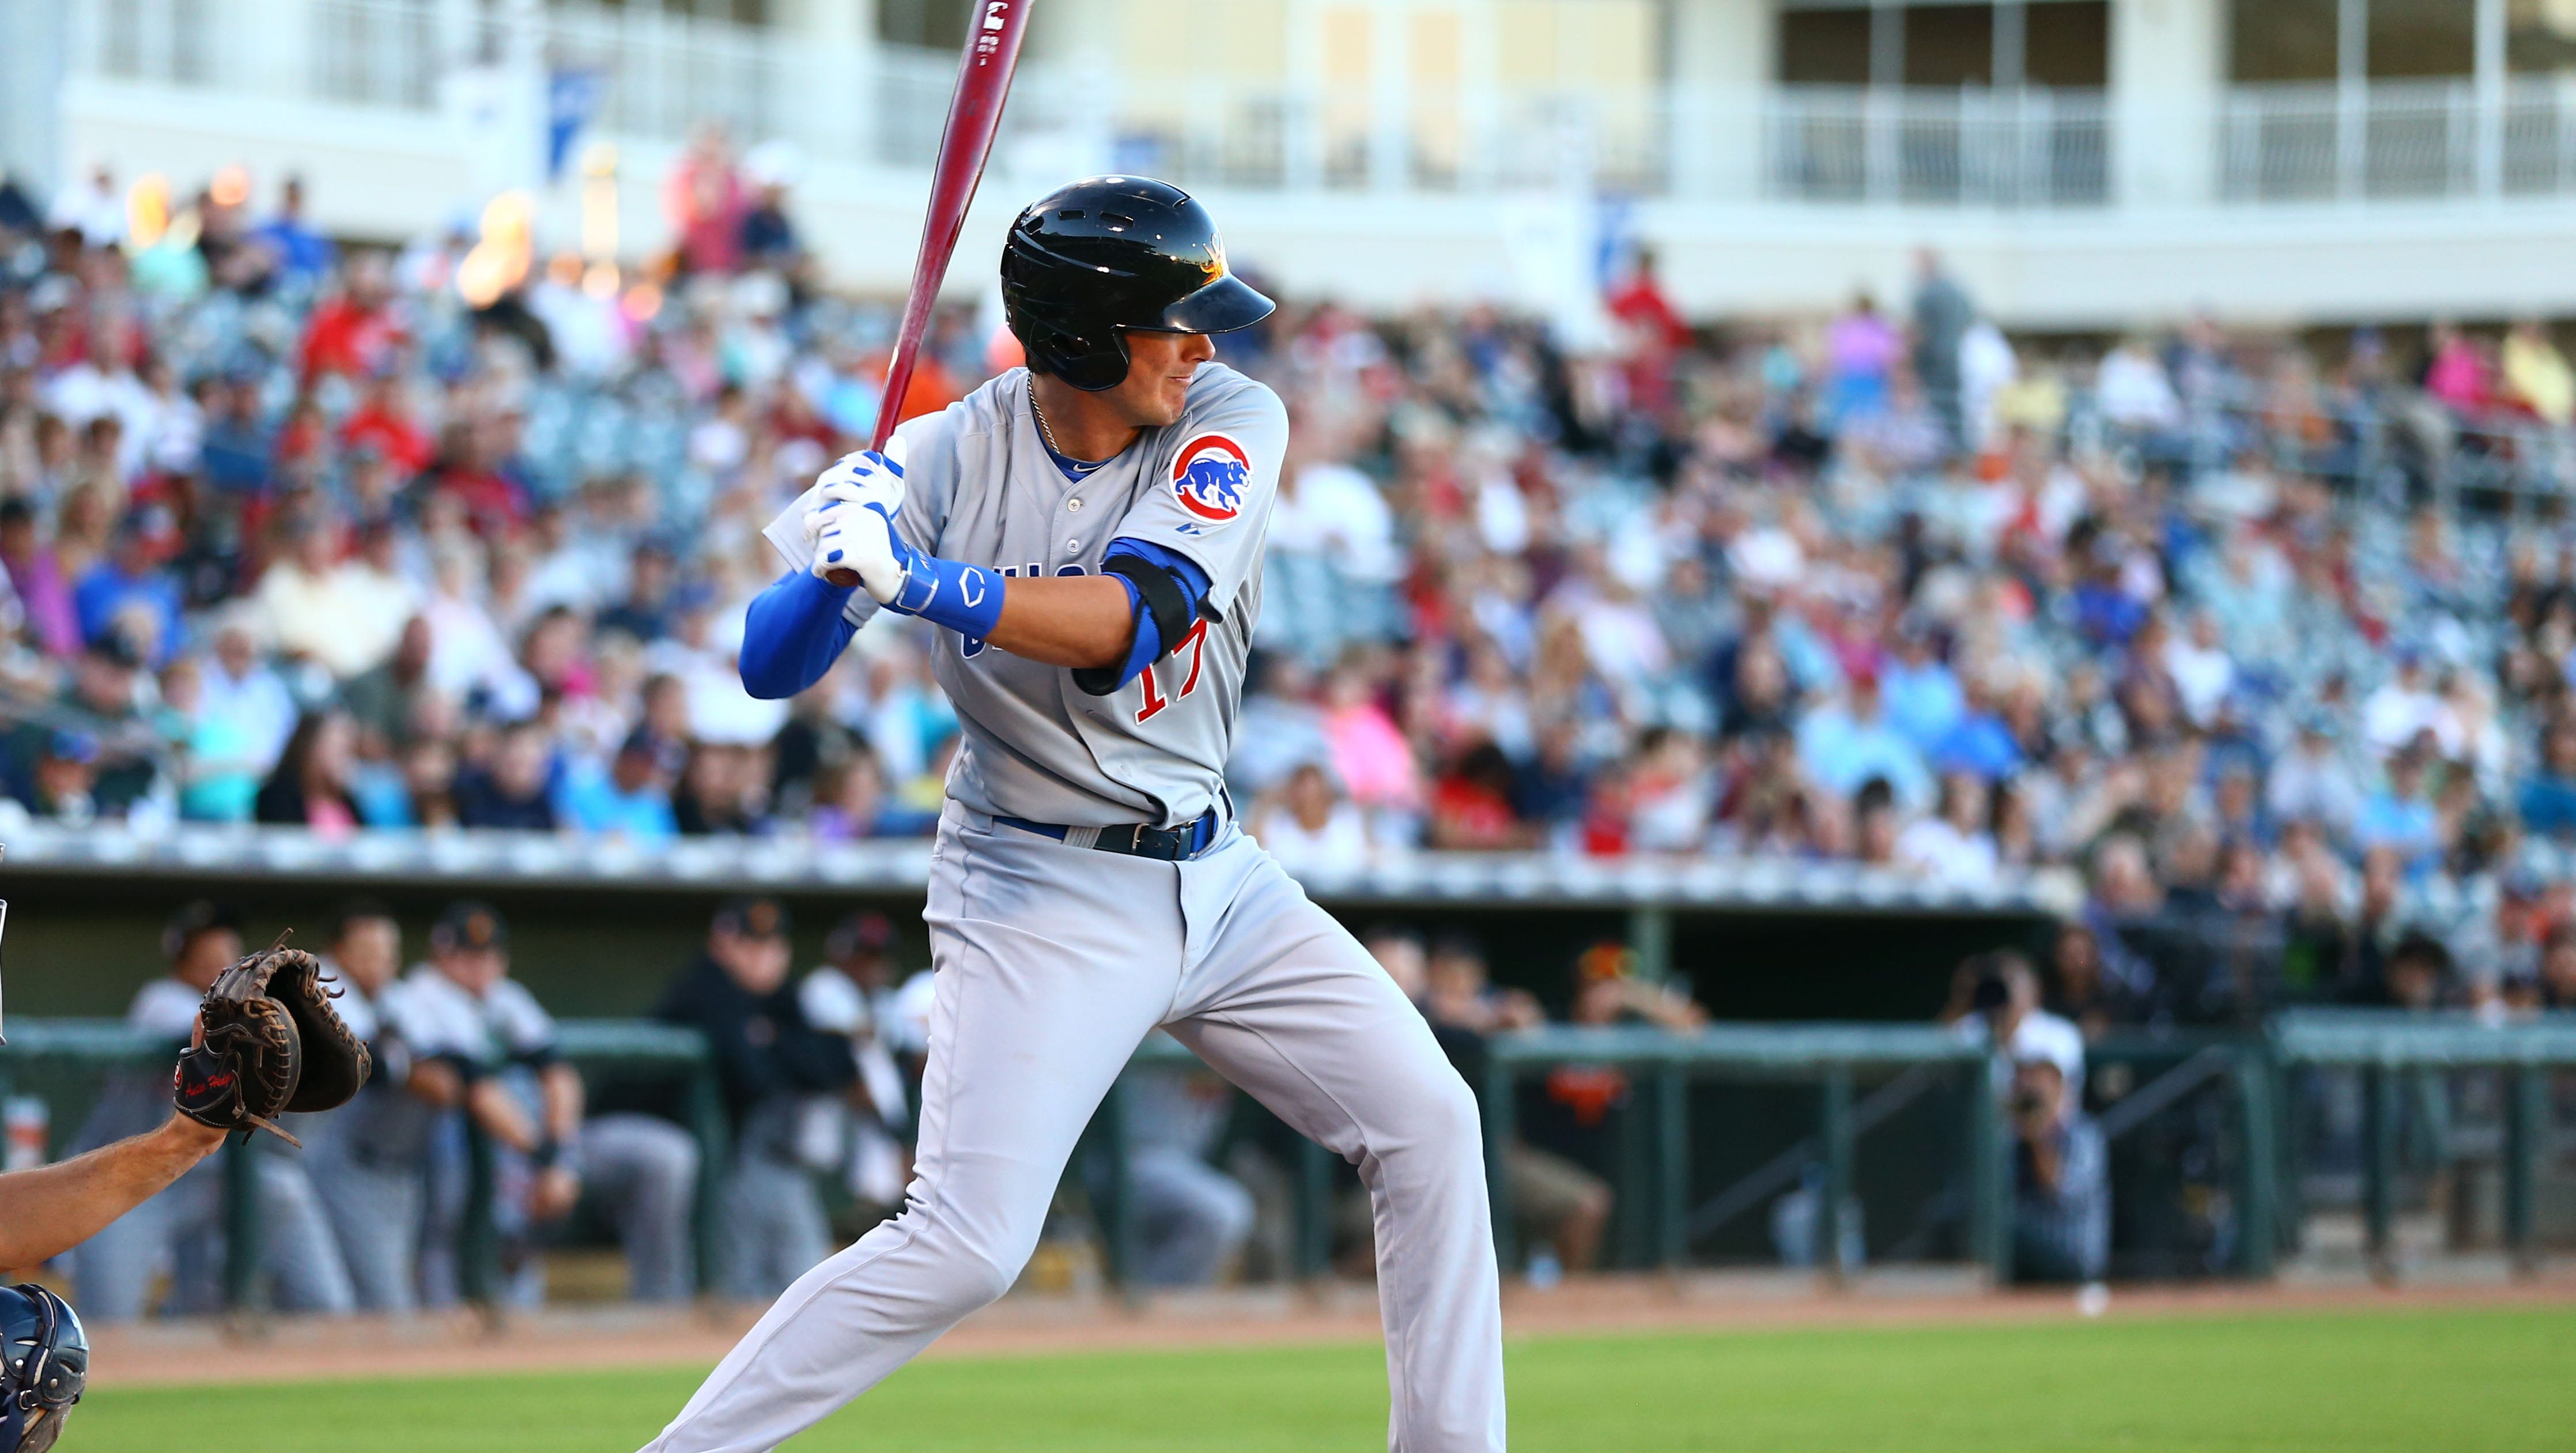 I Cubs' Bryant Connects On Walk Off HR In 12th Inning